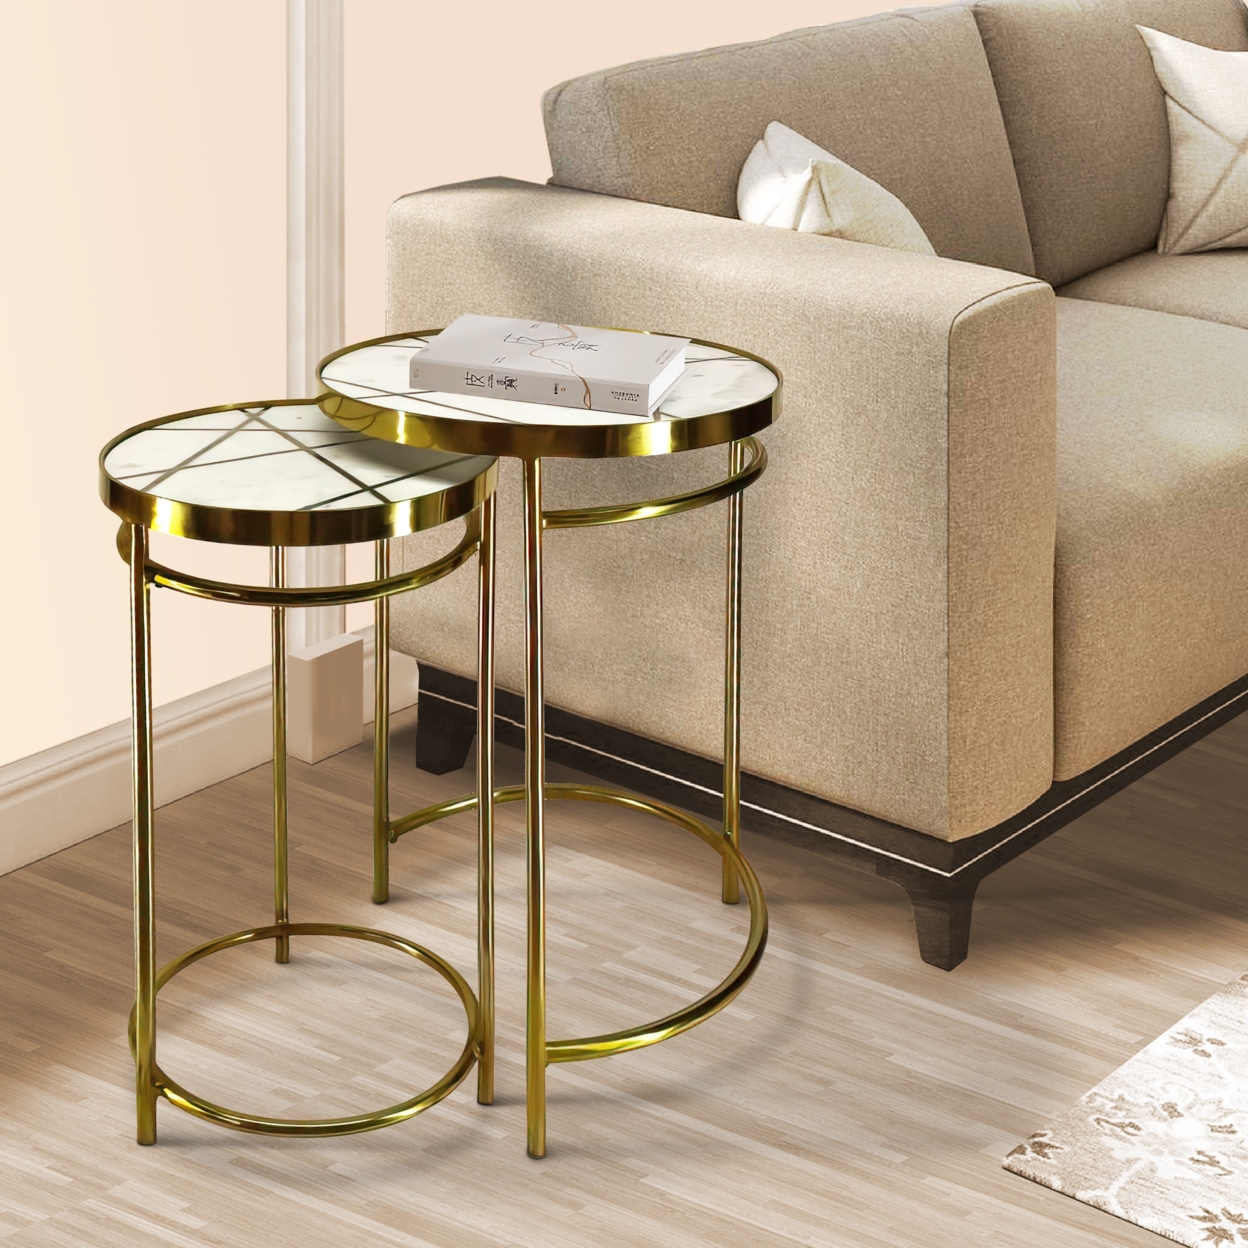 22, 20 Inch Round 2 Piece Marble Top Nesting End Table Set With Metal Frame, Brass Inlay, White- Saltoro Sherpi